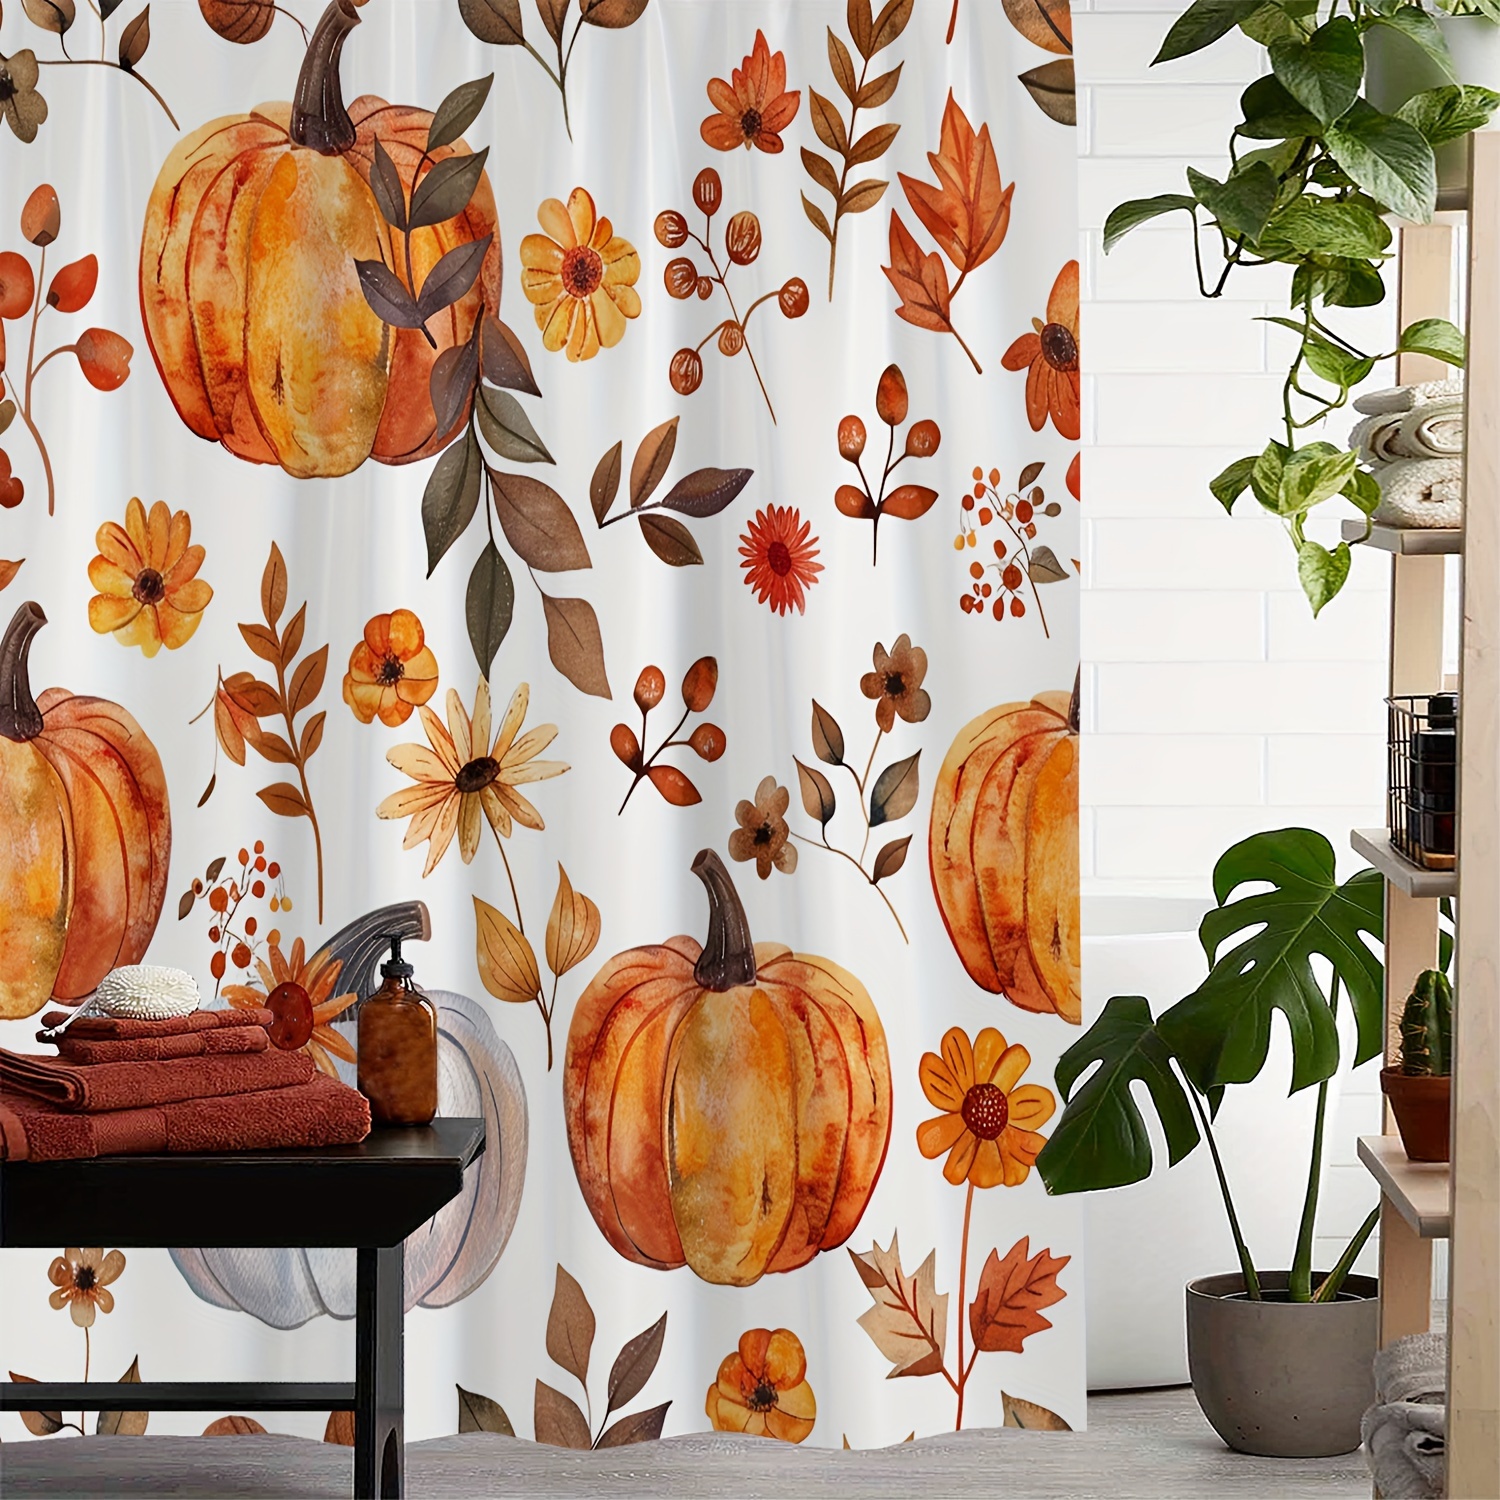 

Autumn Pumpkin Floral Print Waterproof Shower Curtain With 12 Hooks – Machine Washable Polyester Bath Curtain, Artistic Water-resistant Design With Weave Pattern – Includes Hook Set For Easy Hanging